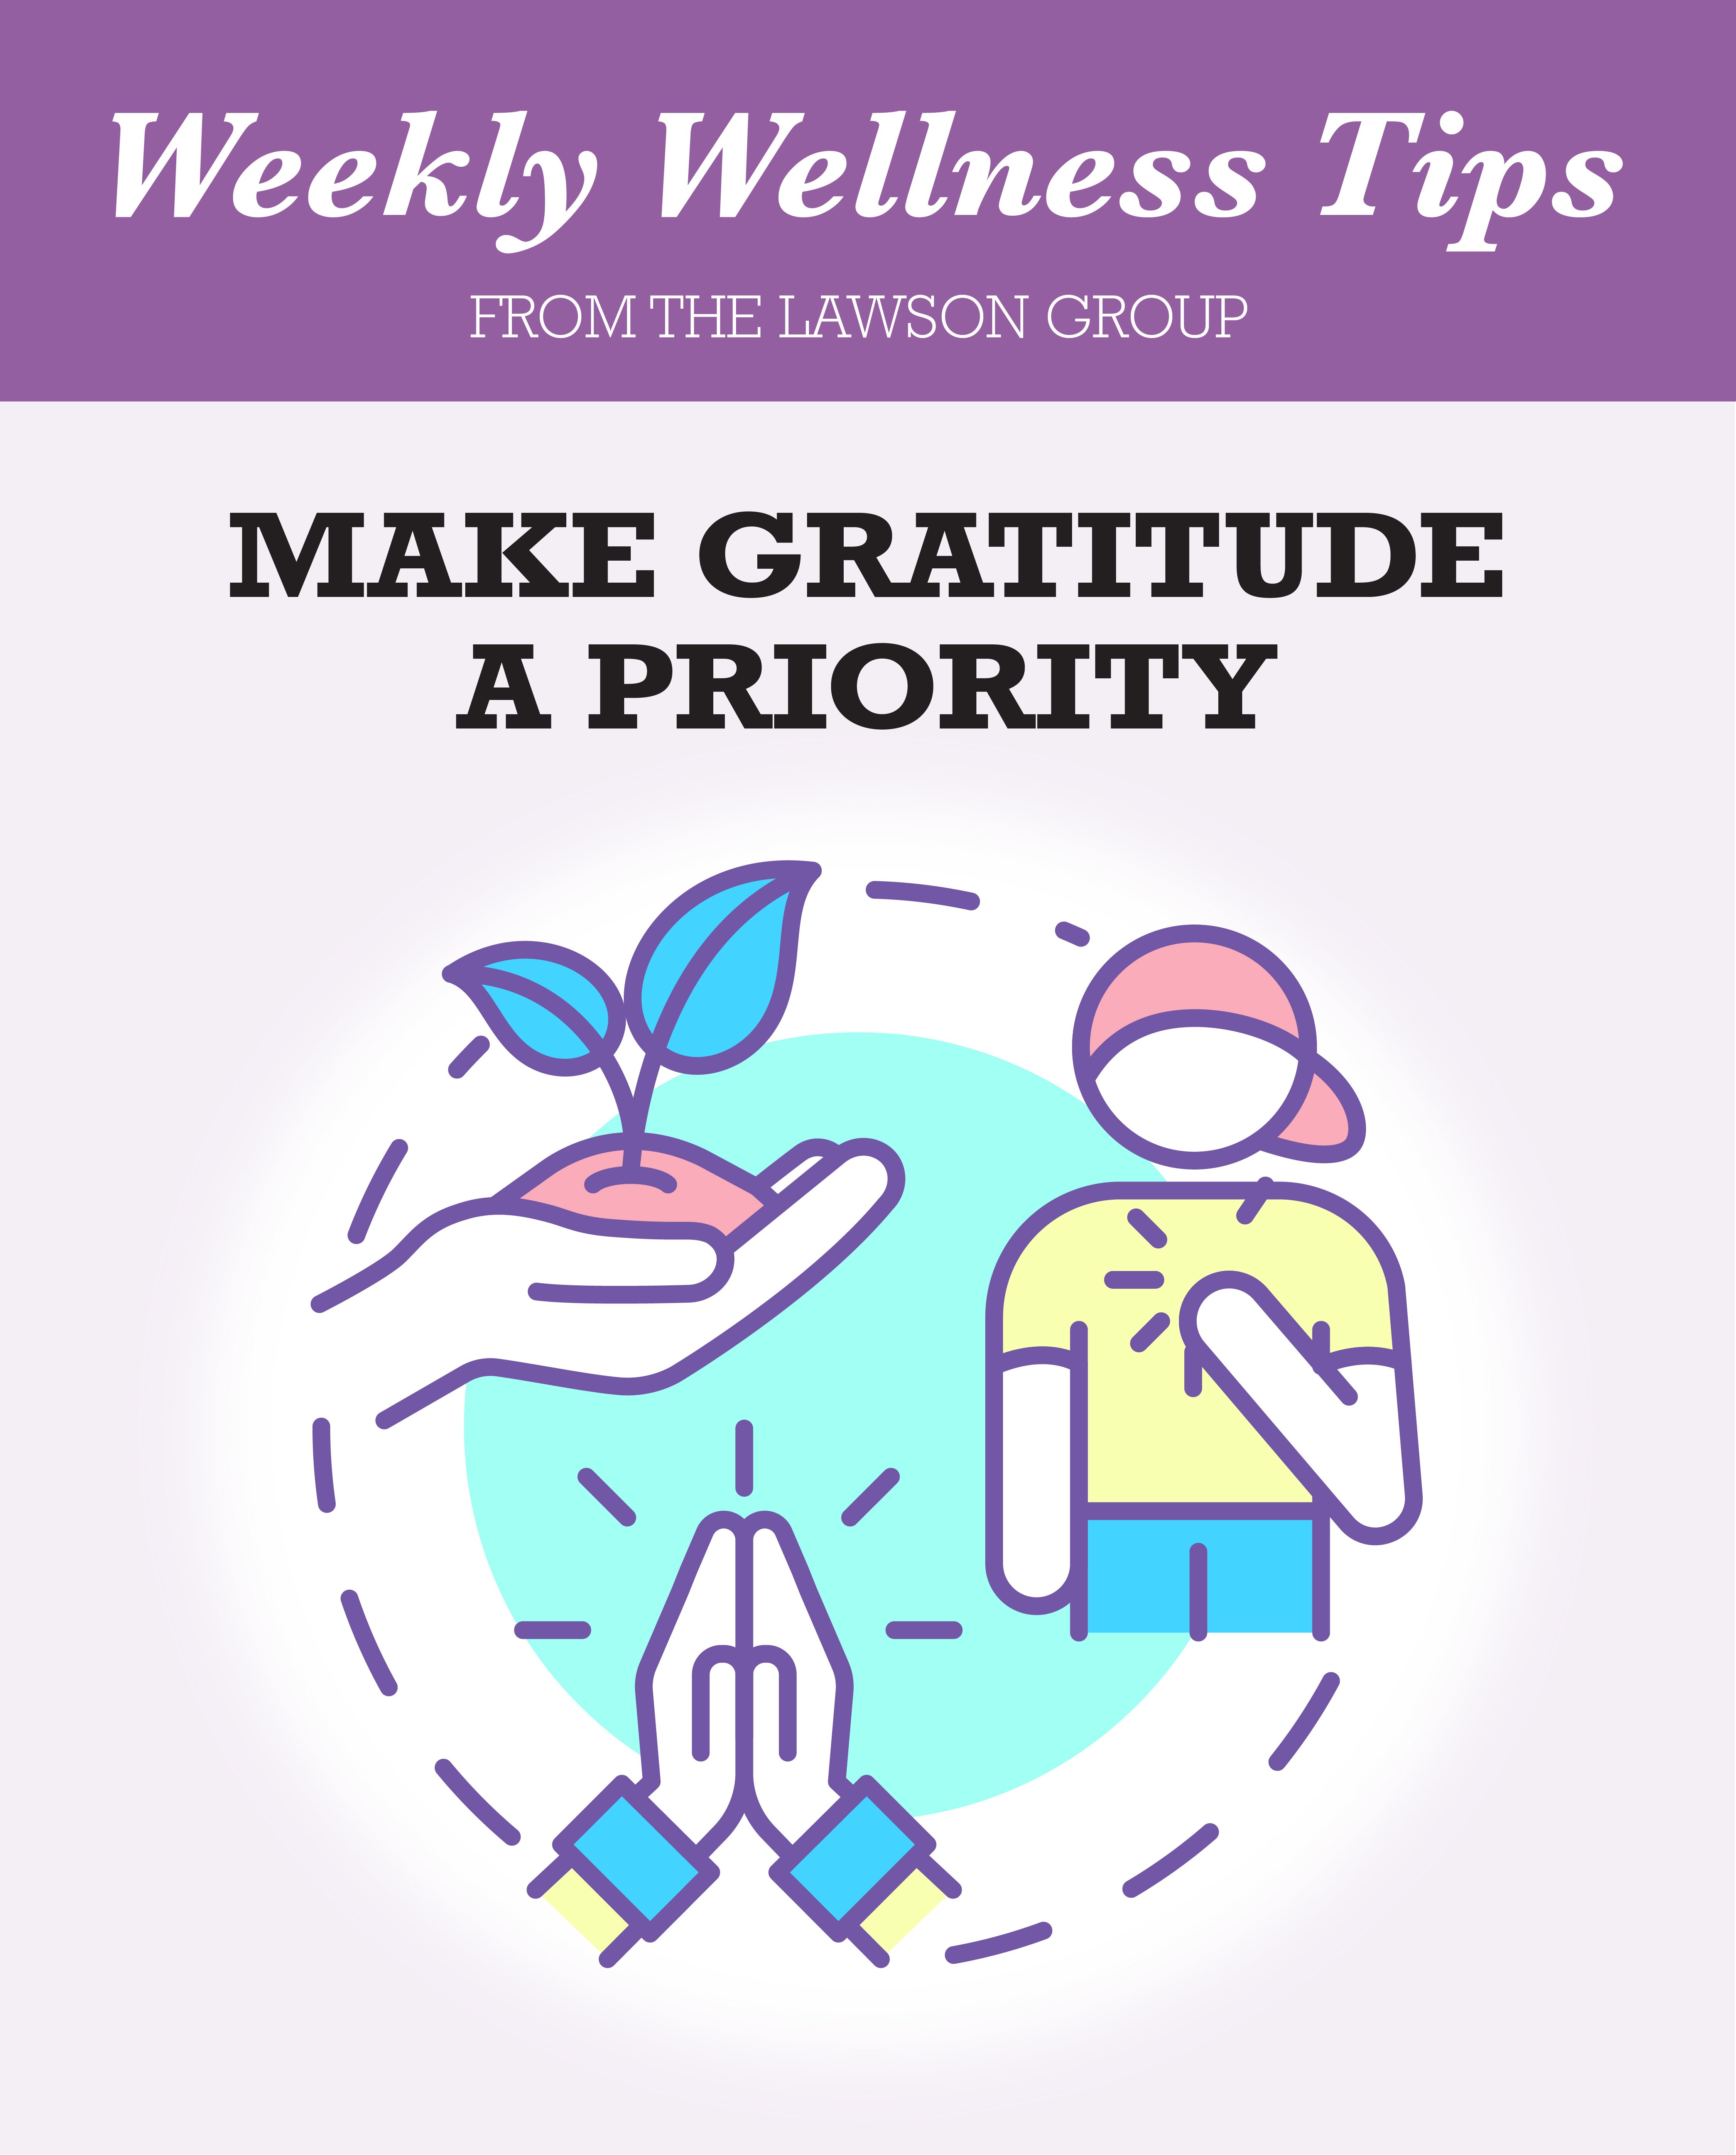 TLG22005 Wellness Tips Being Thankful Infographic-1080px-01